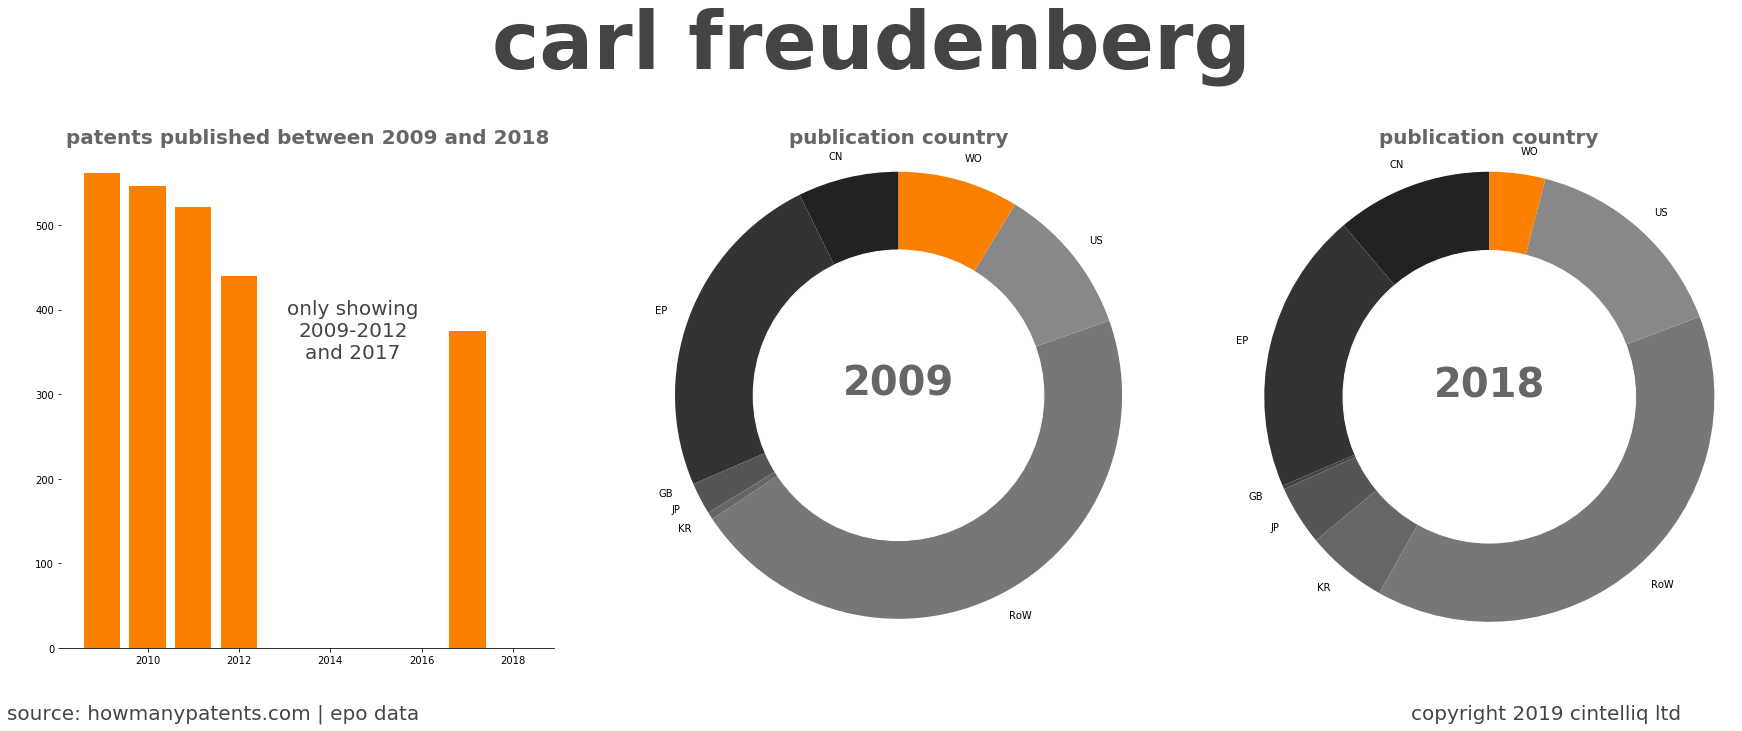 summary of patents for Carl Freudenberg